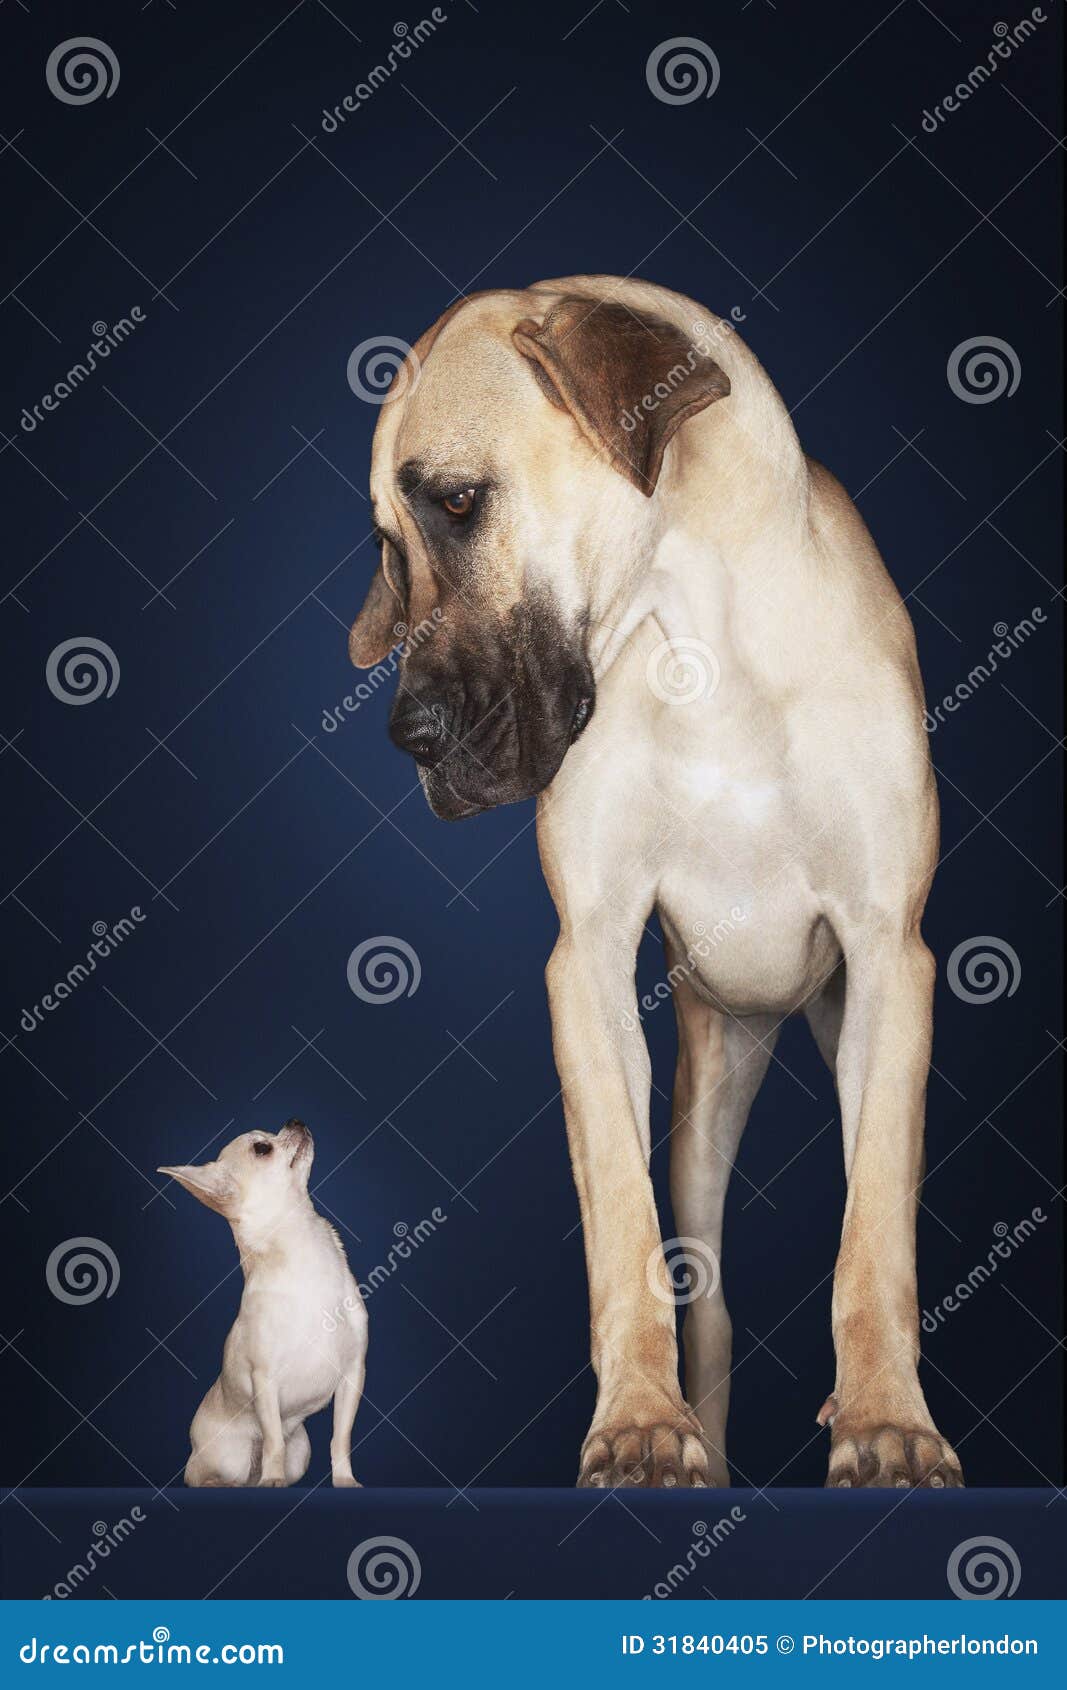 chihuahua with great dane standing alongside